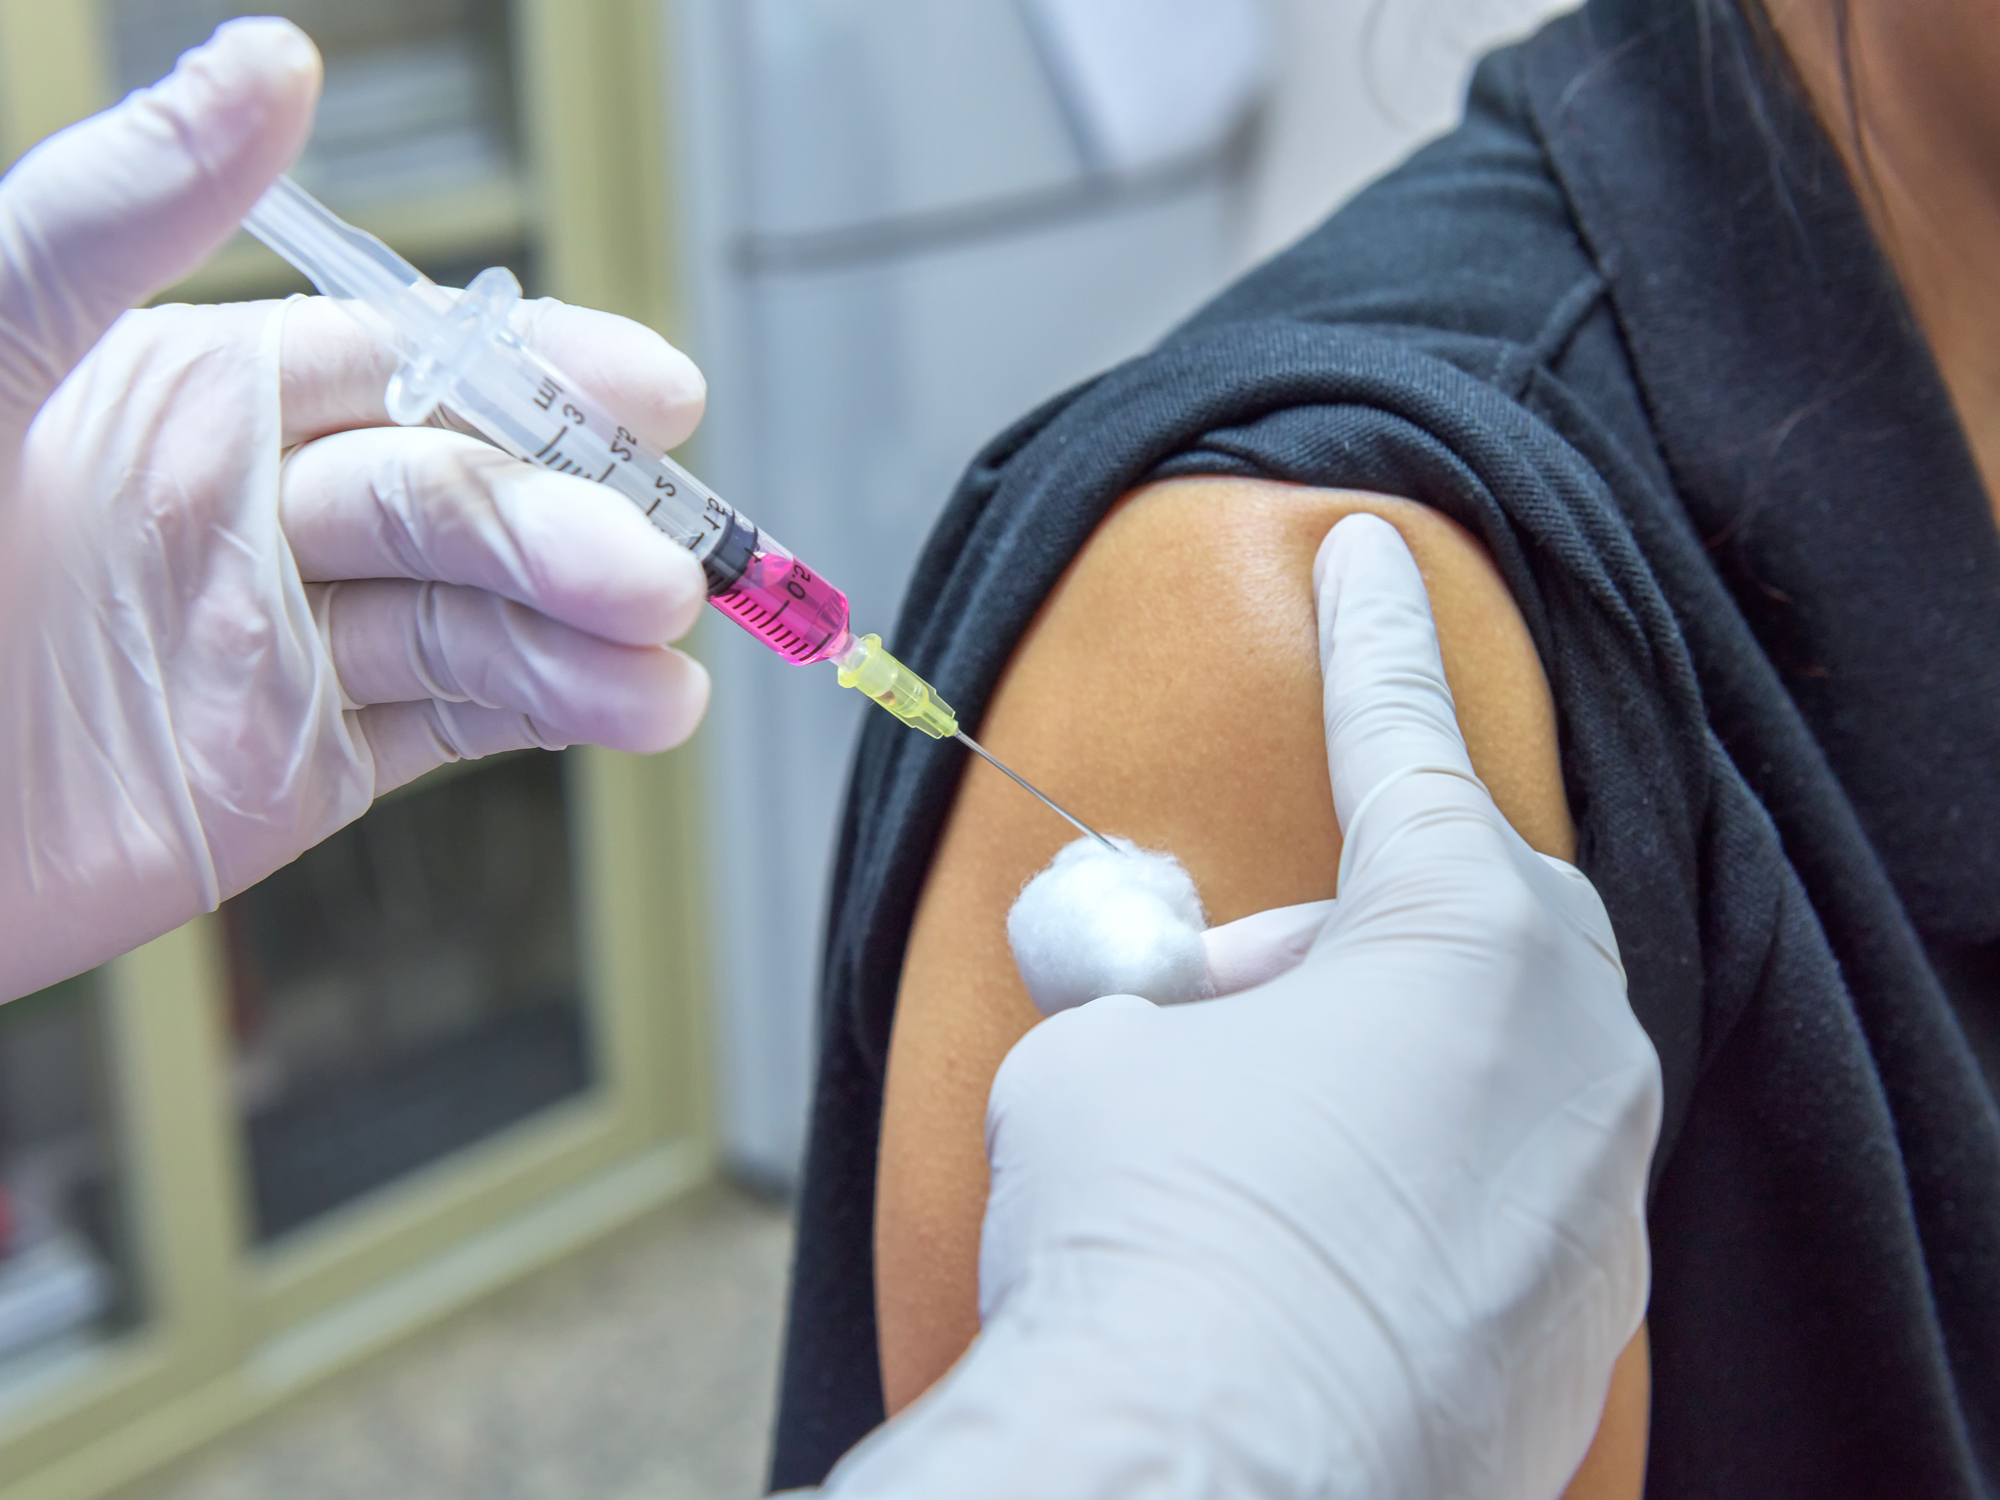 Things you probably don’t know about your flu shot